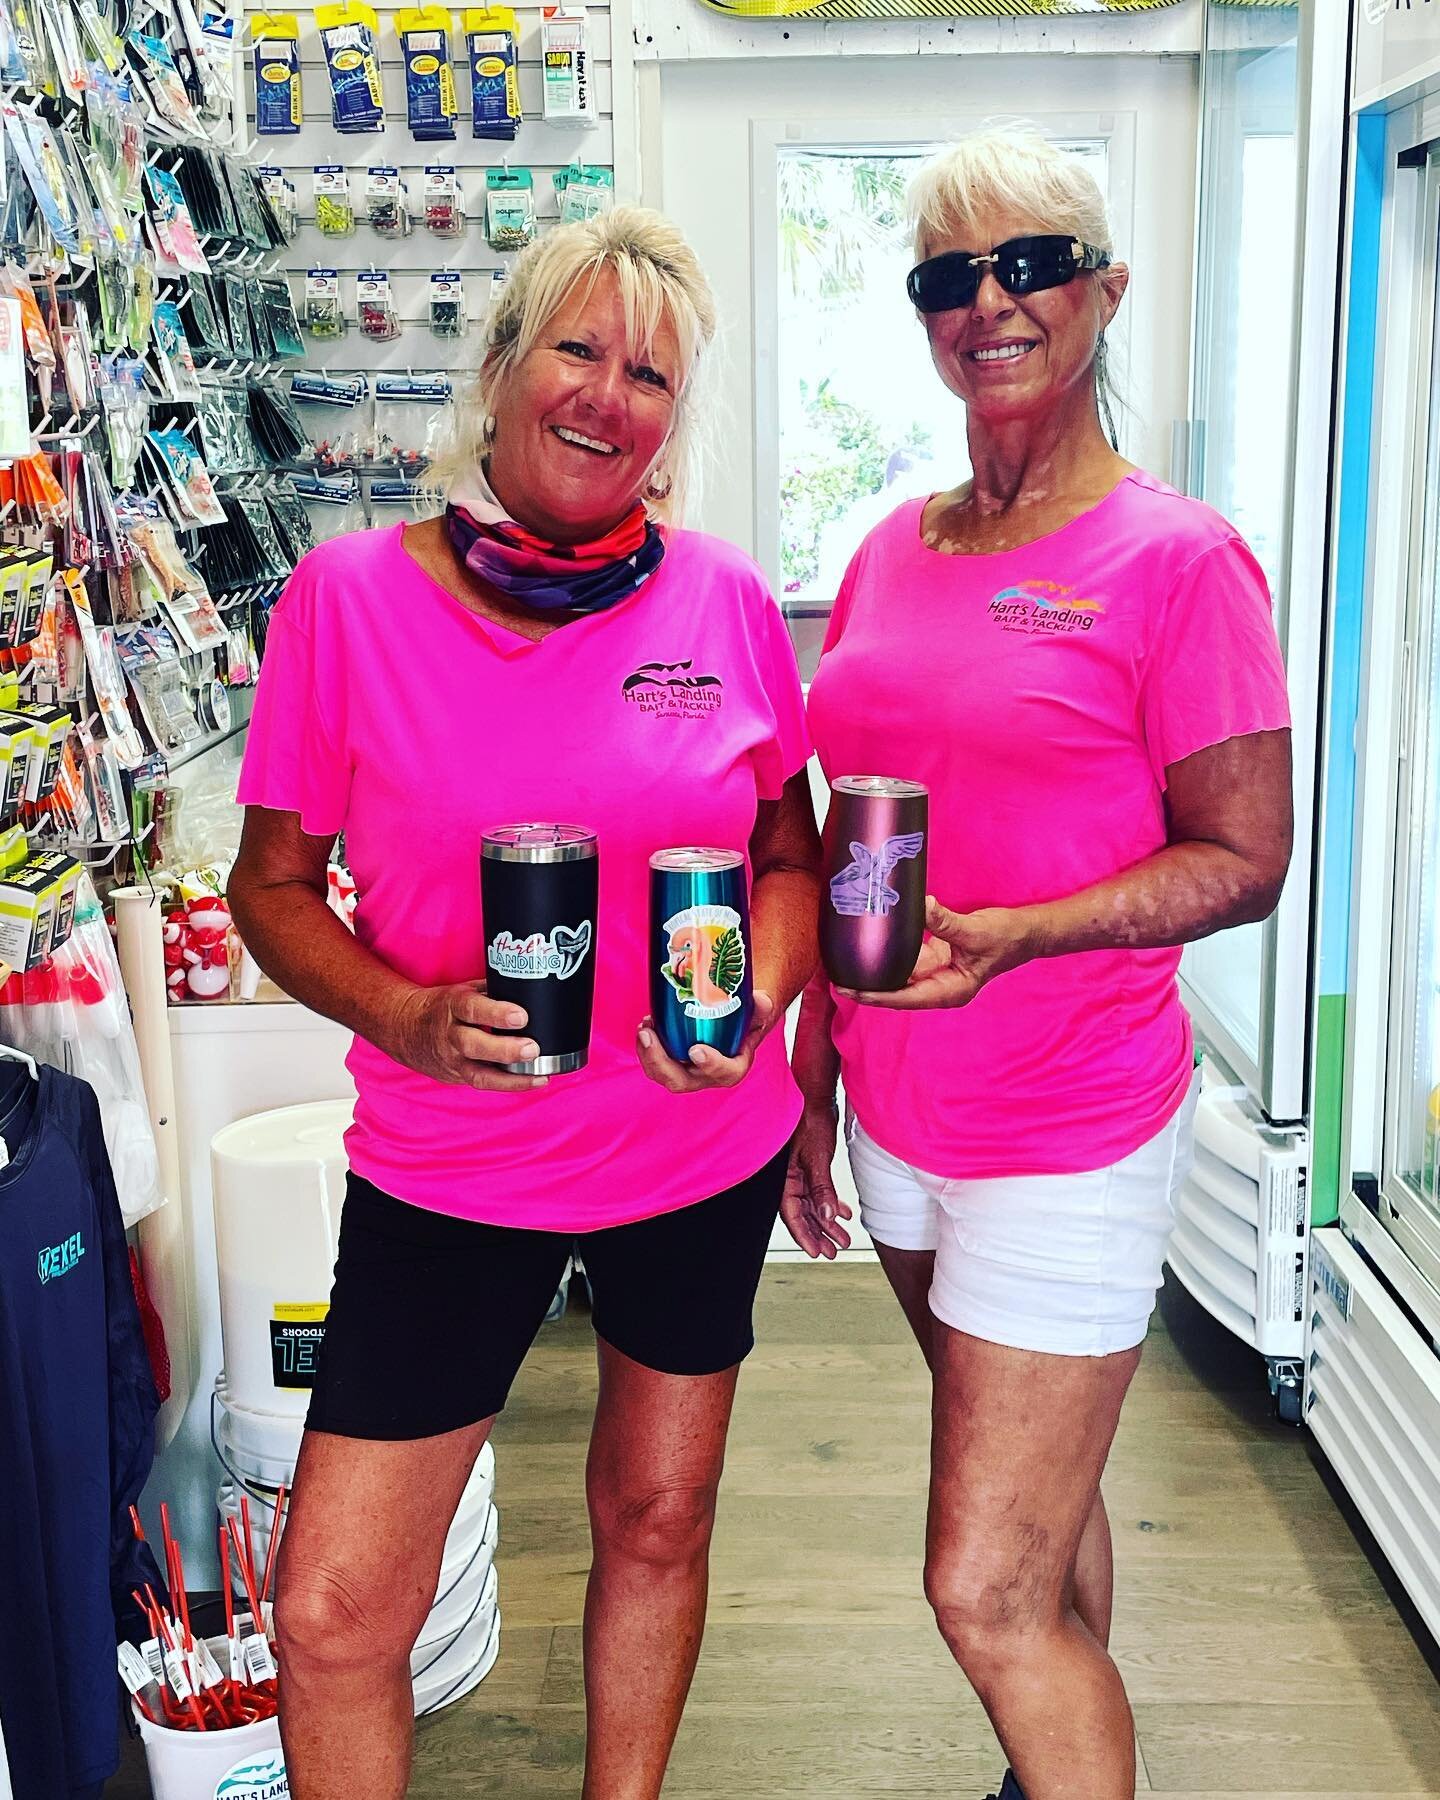 Mary Helen and Tracy are having a blast this morning with matching shirts. Come on down and see them open til 10 tonight. #thingstodoinsarasota